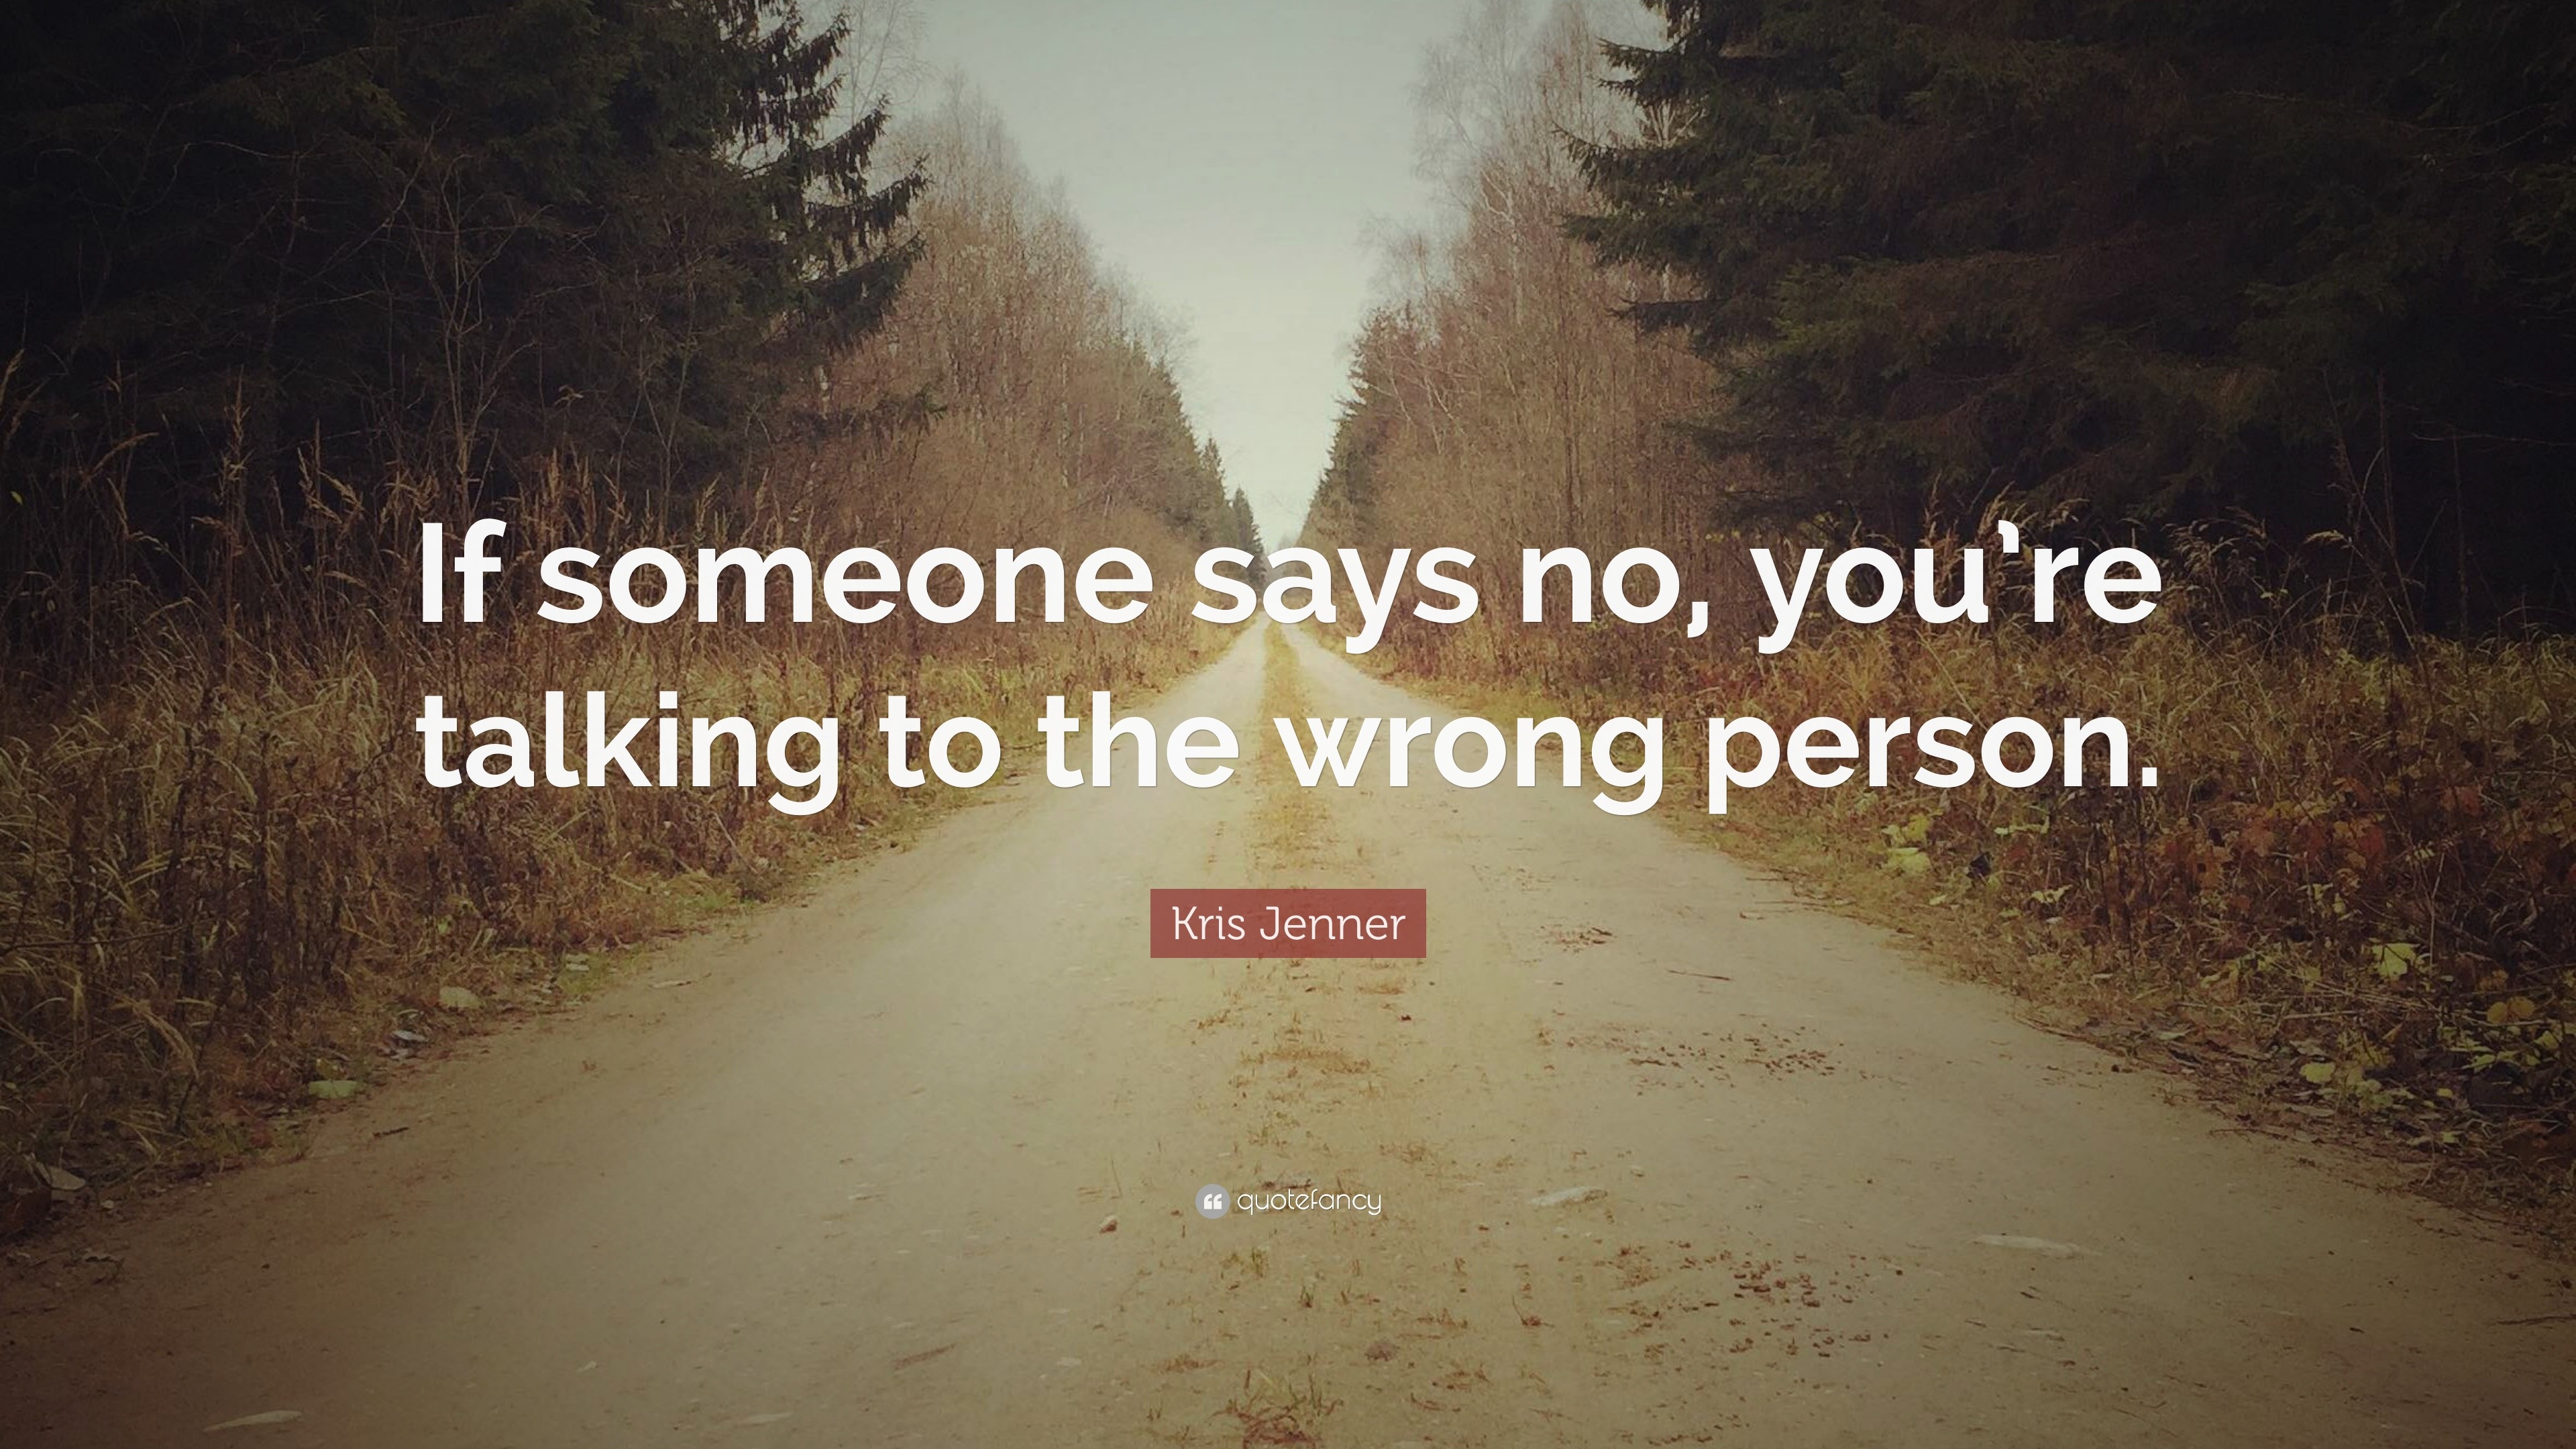 Kris Jenner Quote: “If someone says no, you’re talking to the wrong